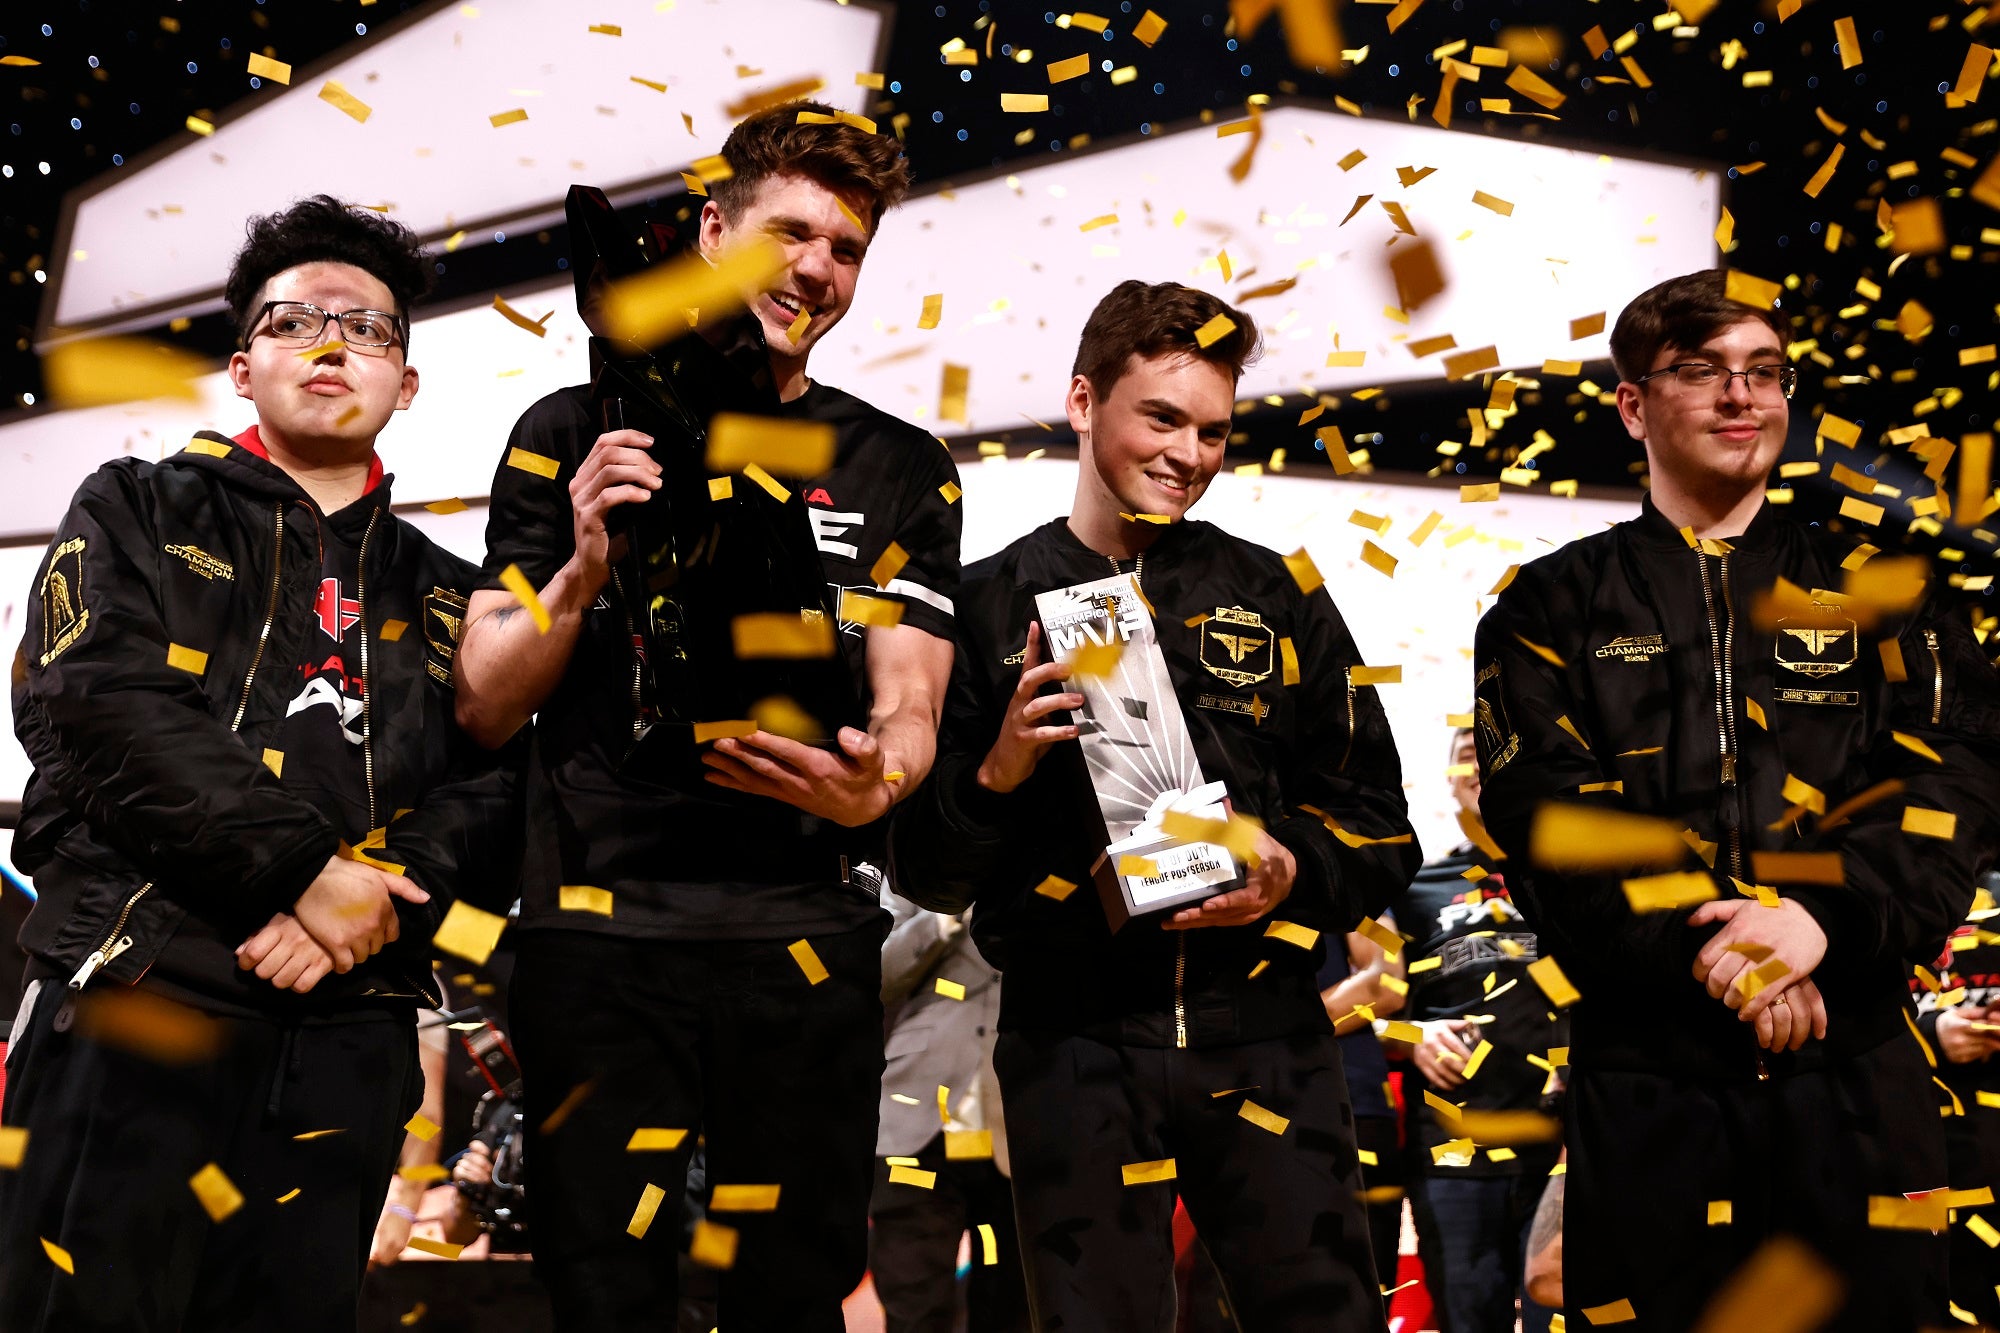 Atlanta FaZe celebrate after defeating Toronto Ultra in the Call of Duty League Championship Final at Galen Centre on August 22, 2021 in Los Angeles, California (Photo: Michael Owens, Getty Images)